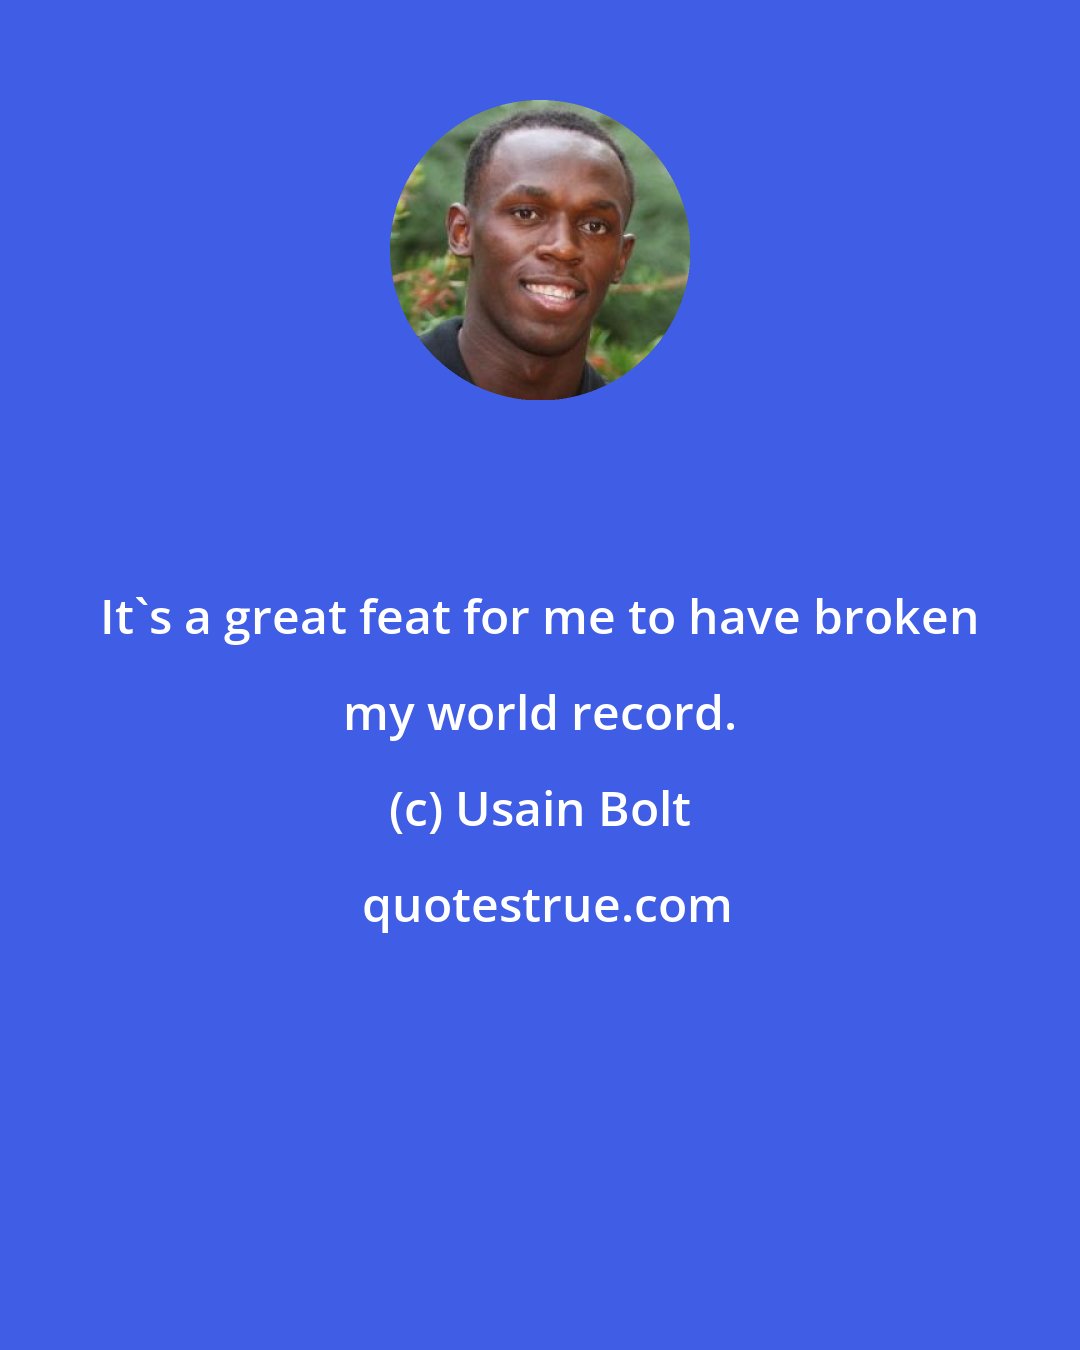 Usain Bolt: It's a great feat for me to have broken my world record.